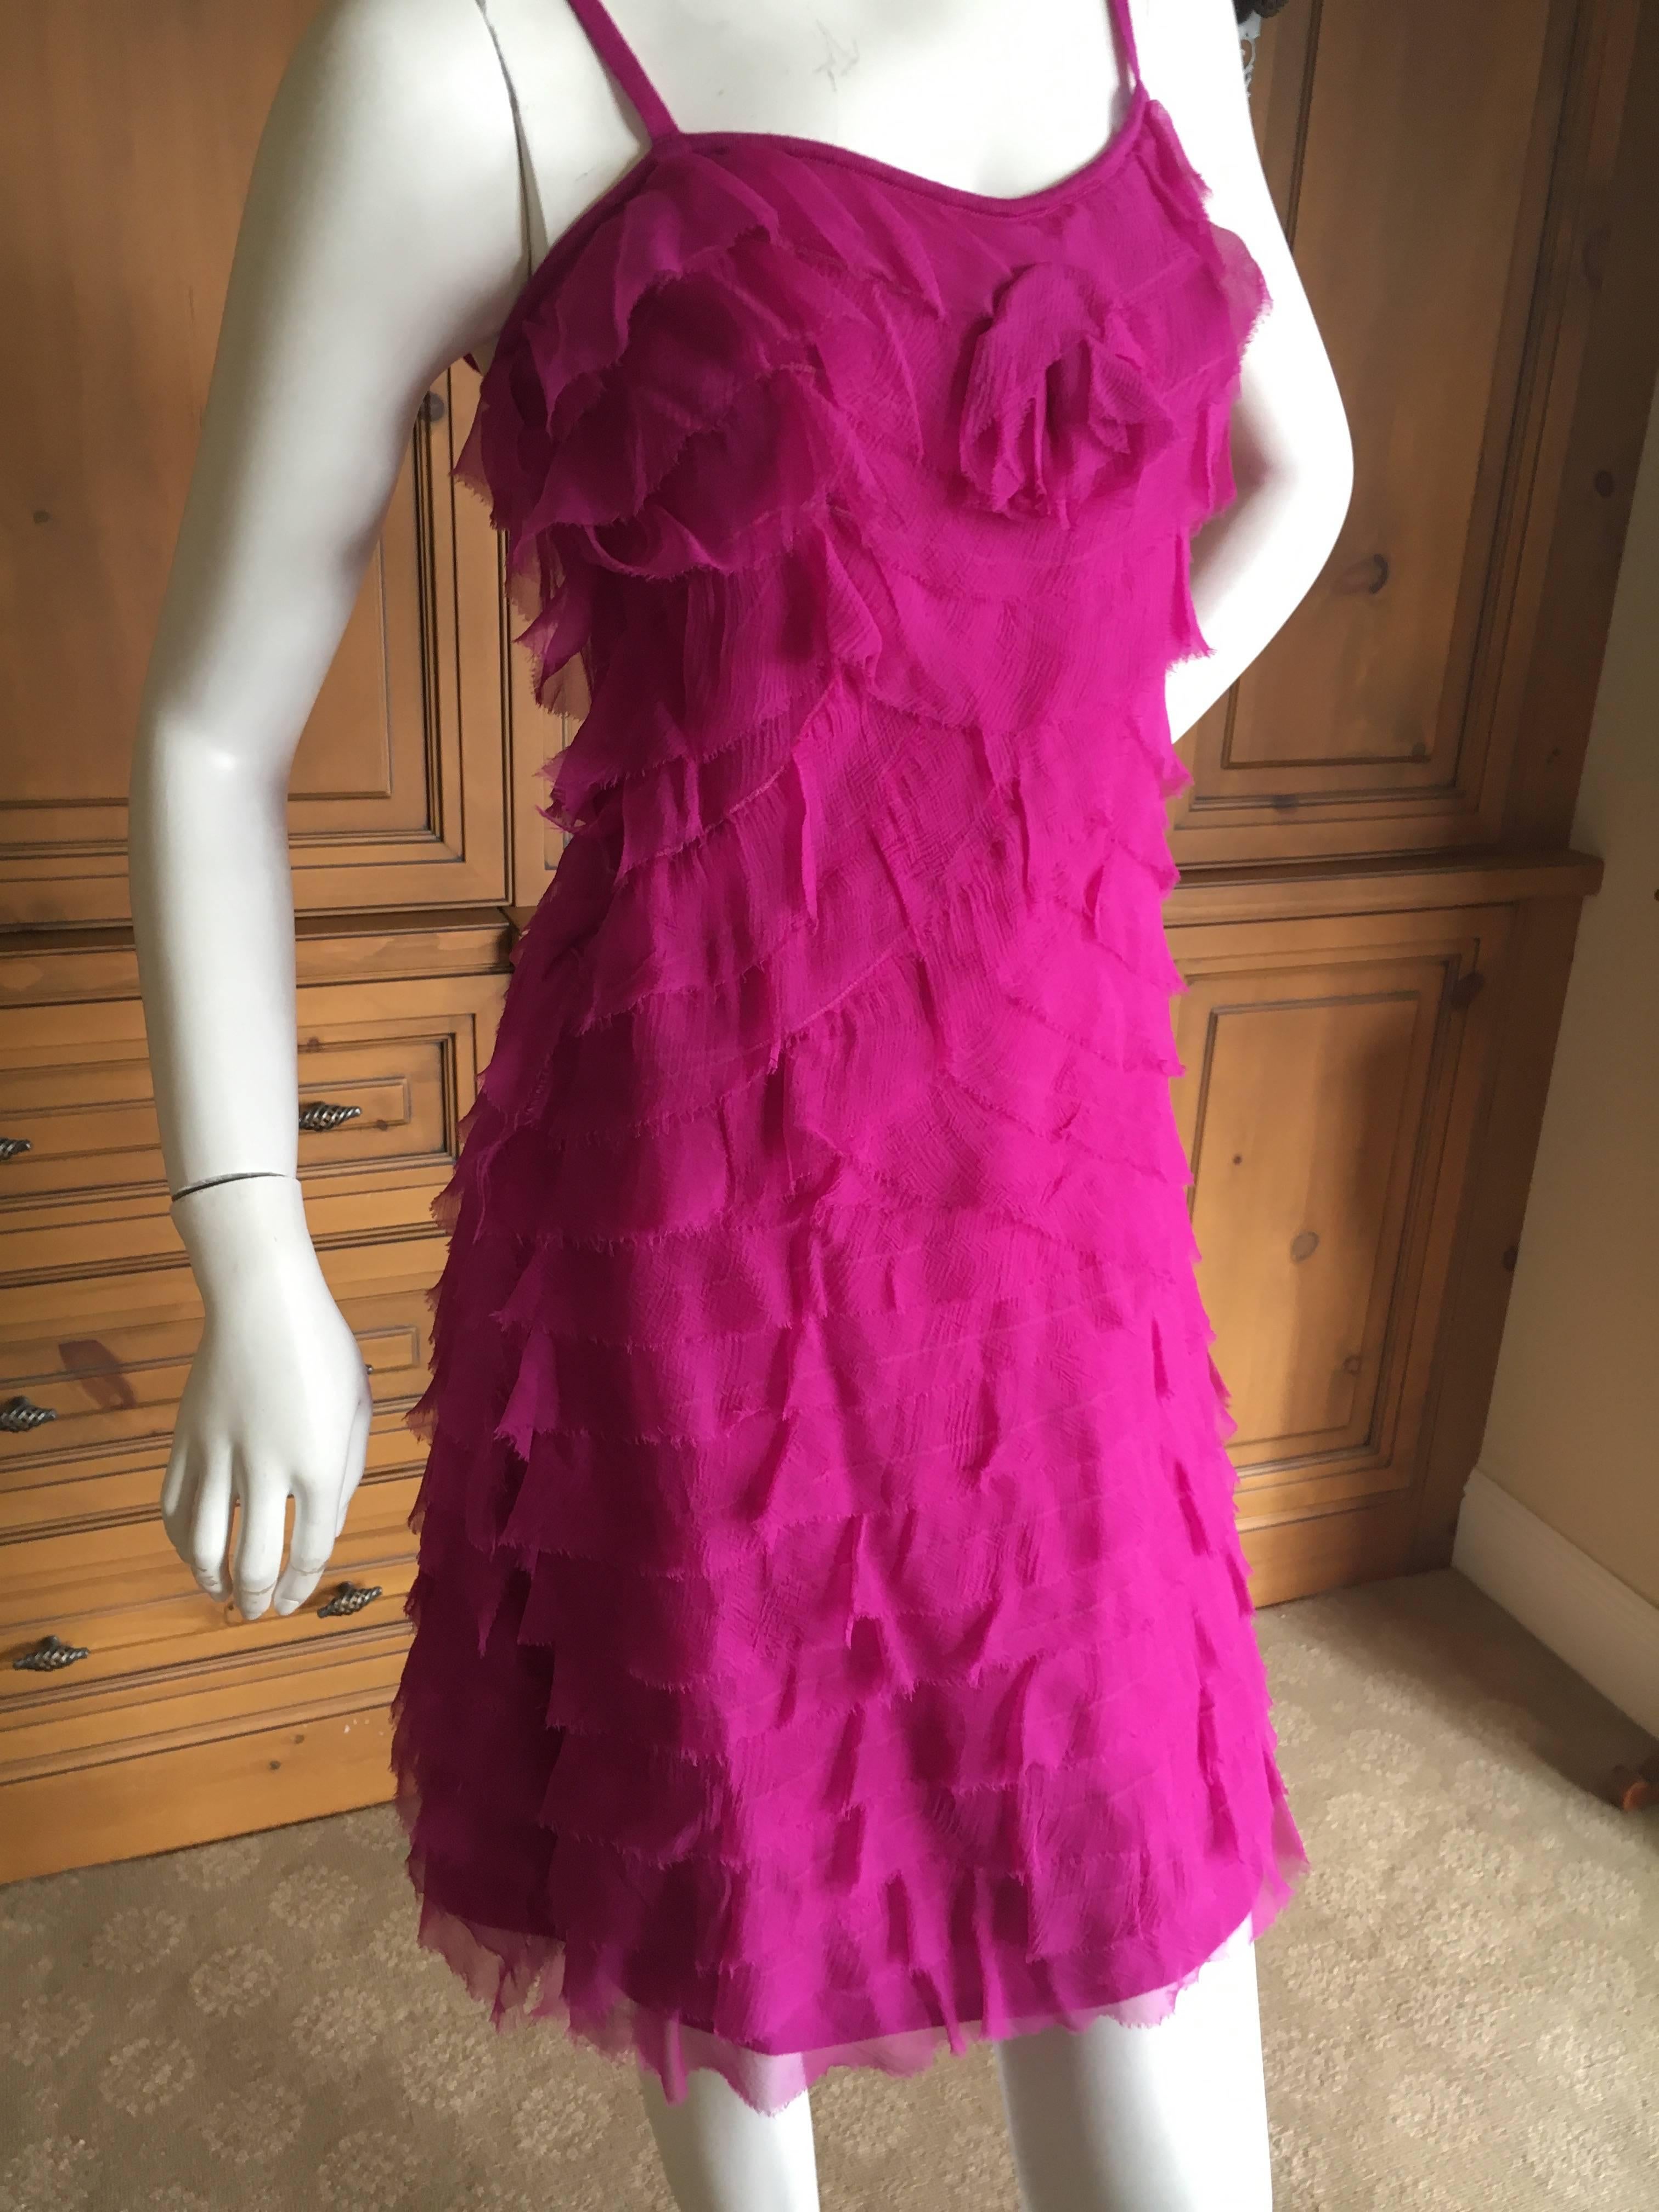 Exquisite knit dress from Christian Dior by John Galliano.
Very fine and soft silk and cashmere knit, with layers of raw edge silk ruffles.
Sie 36, there is a lot of stretch in this.
Bust 34"
Waist 25'
Hips 41'
Length 35"
Excellent